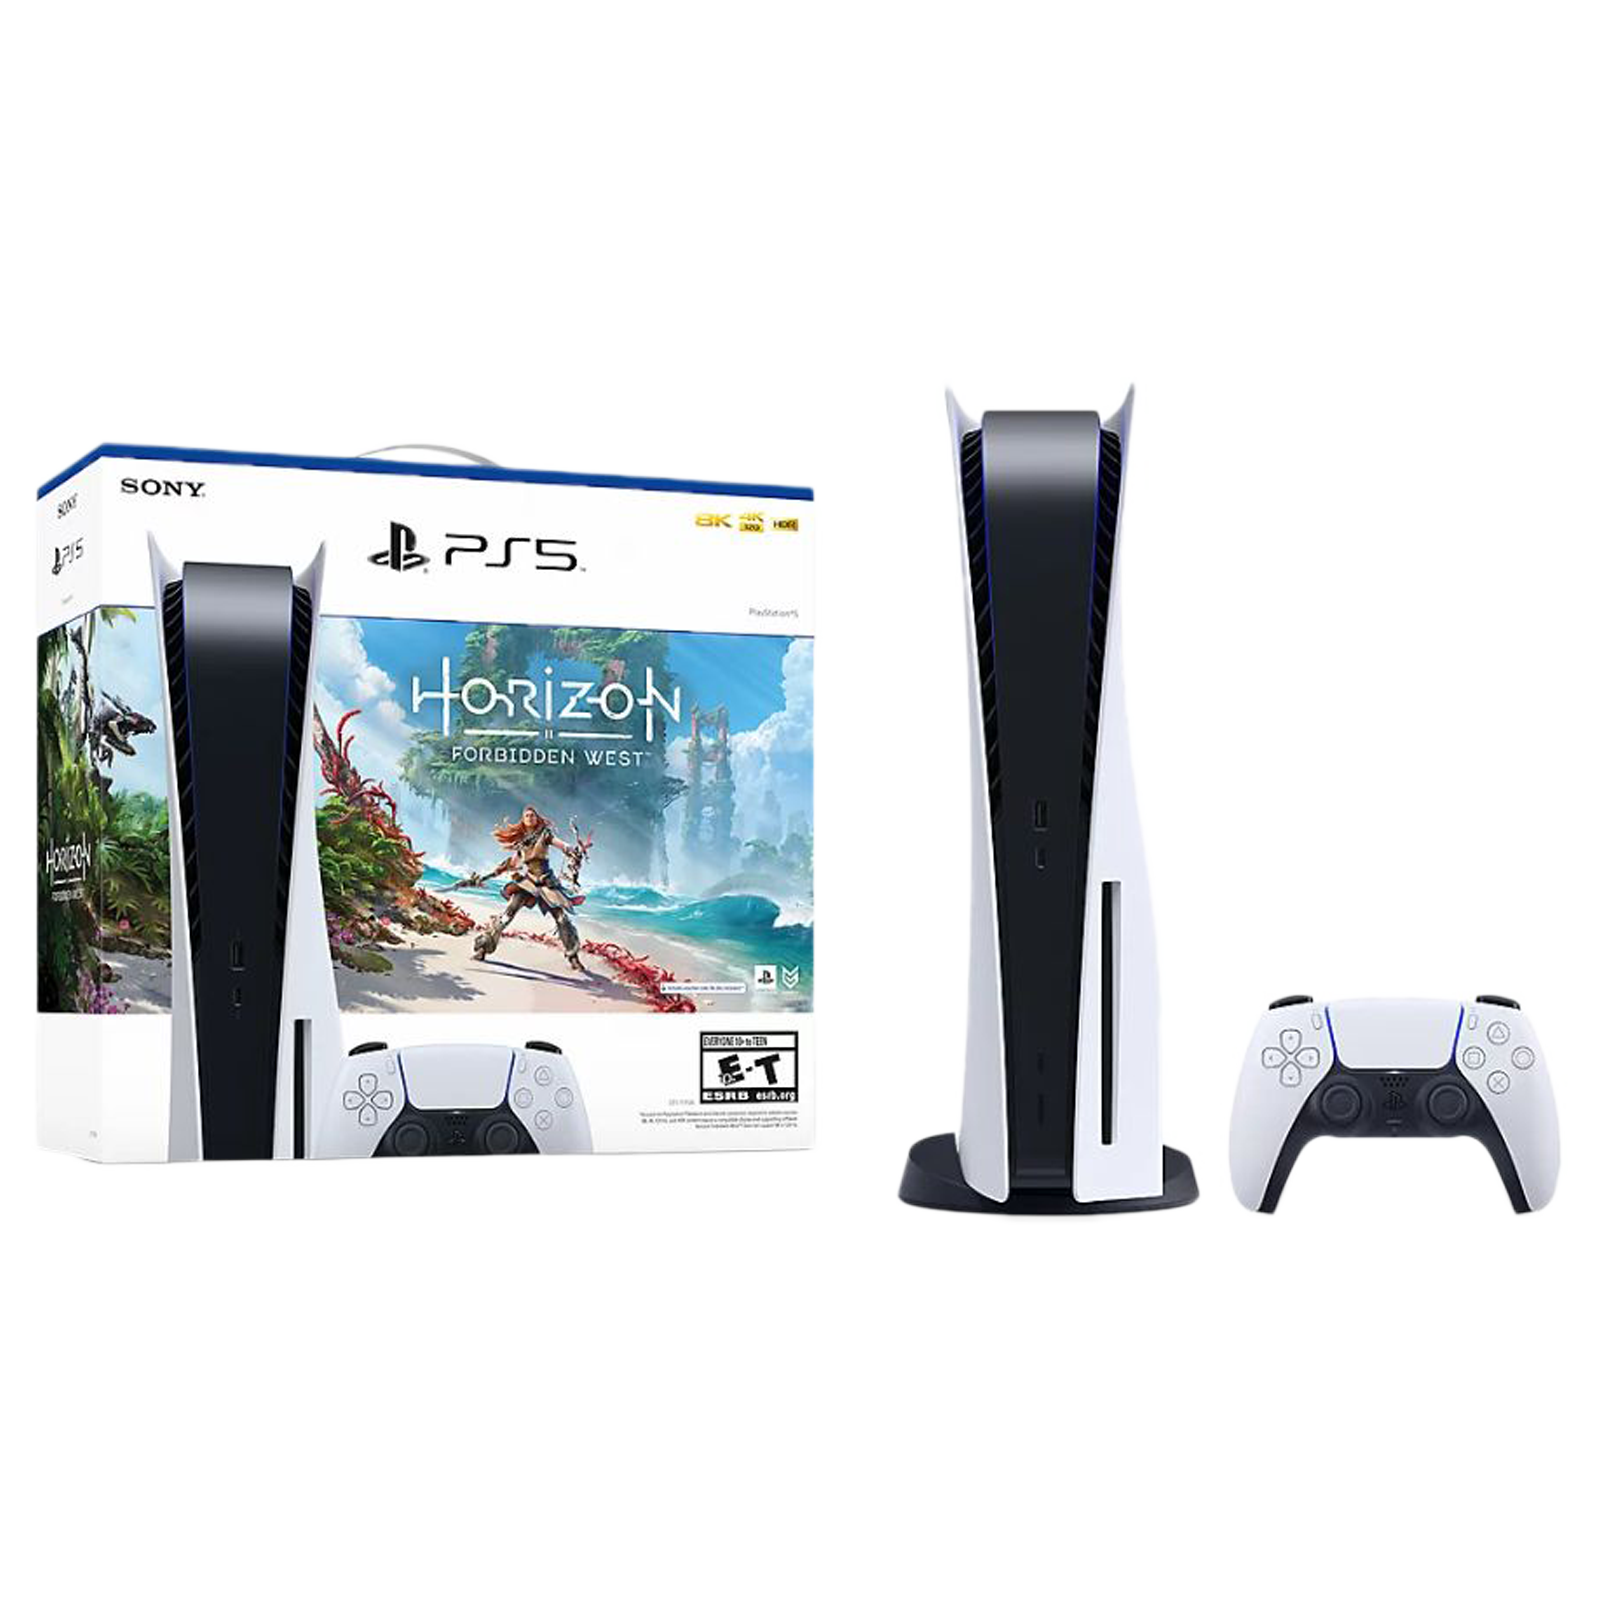 SONY Console With Horizon Forbidden West Voucher For PS5 (Action &  Adventure Games, CFI-1108A01)